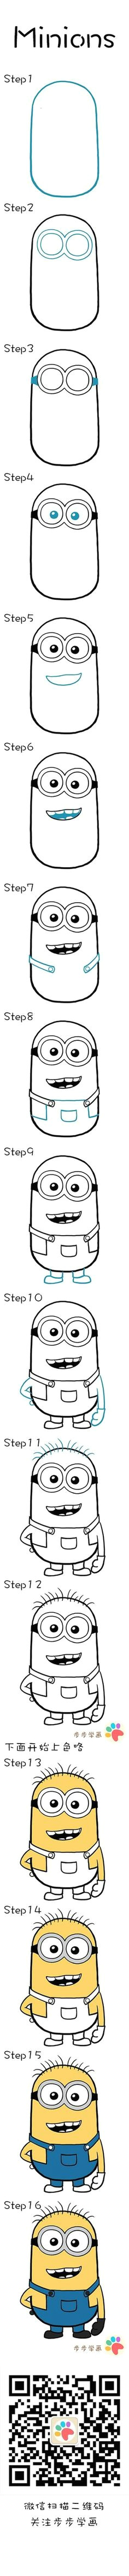 learn how to draw minions fun friday or quick take and make lessons the